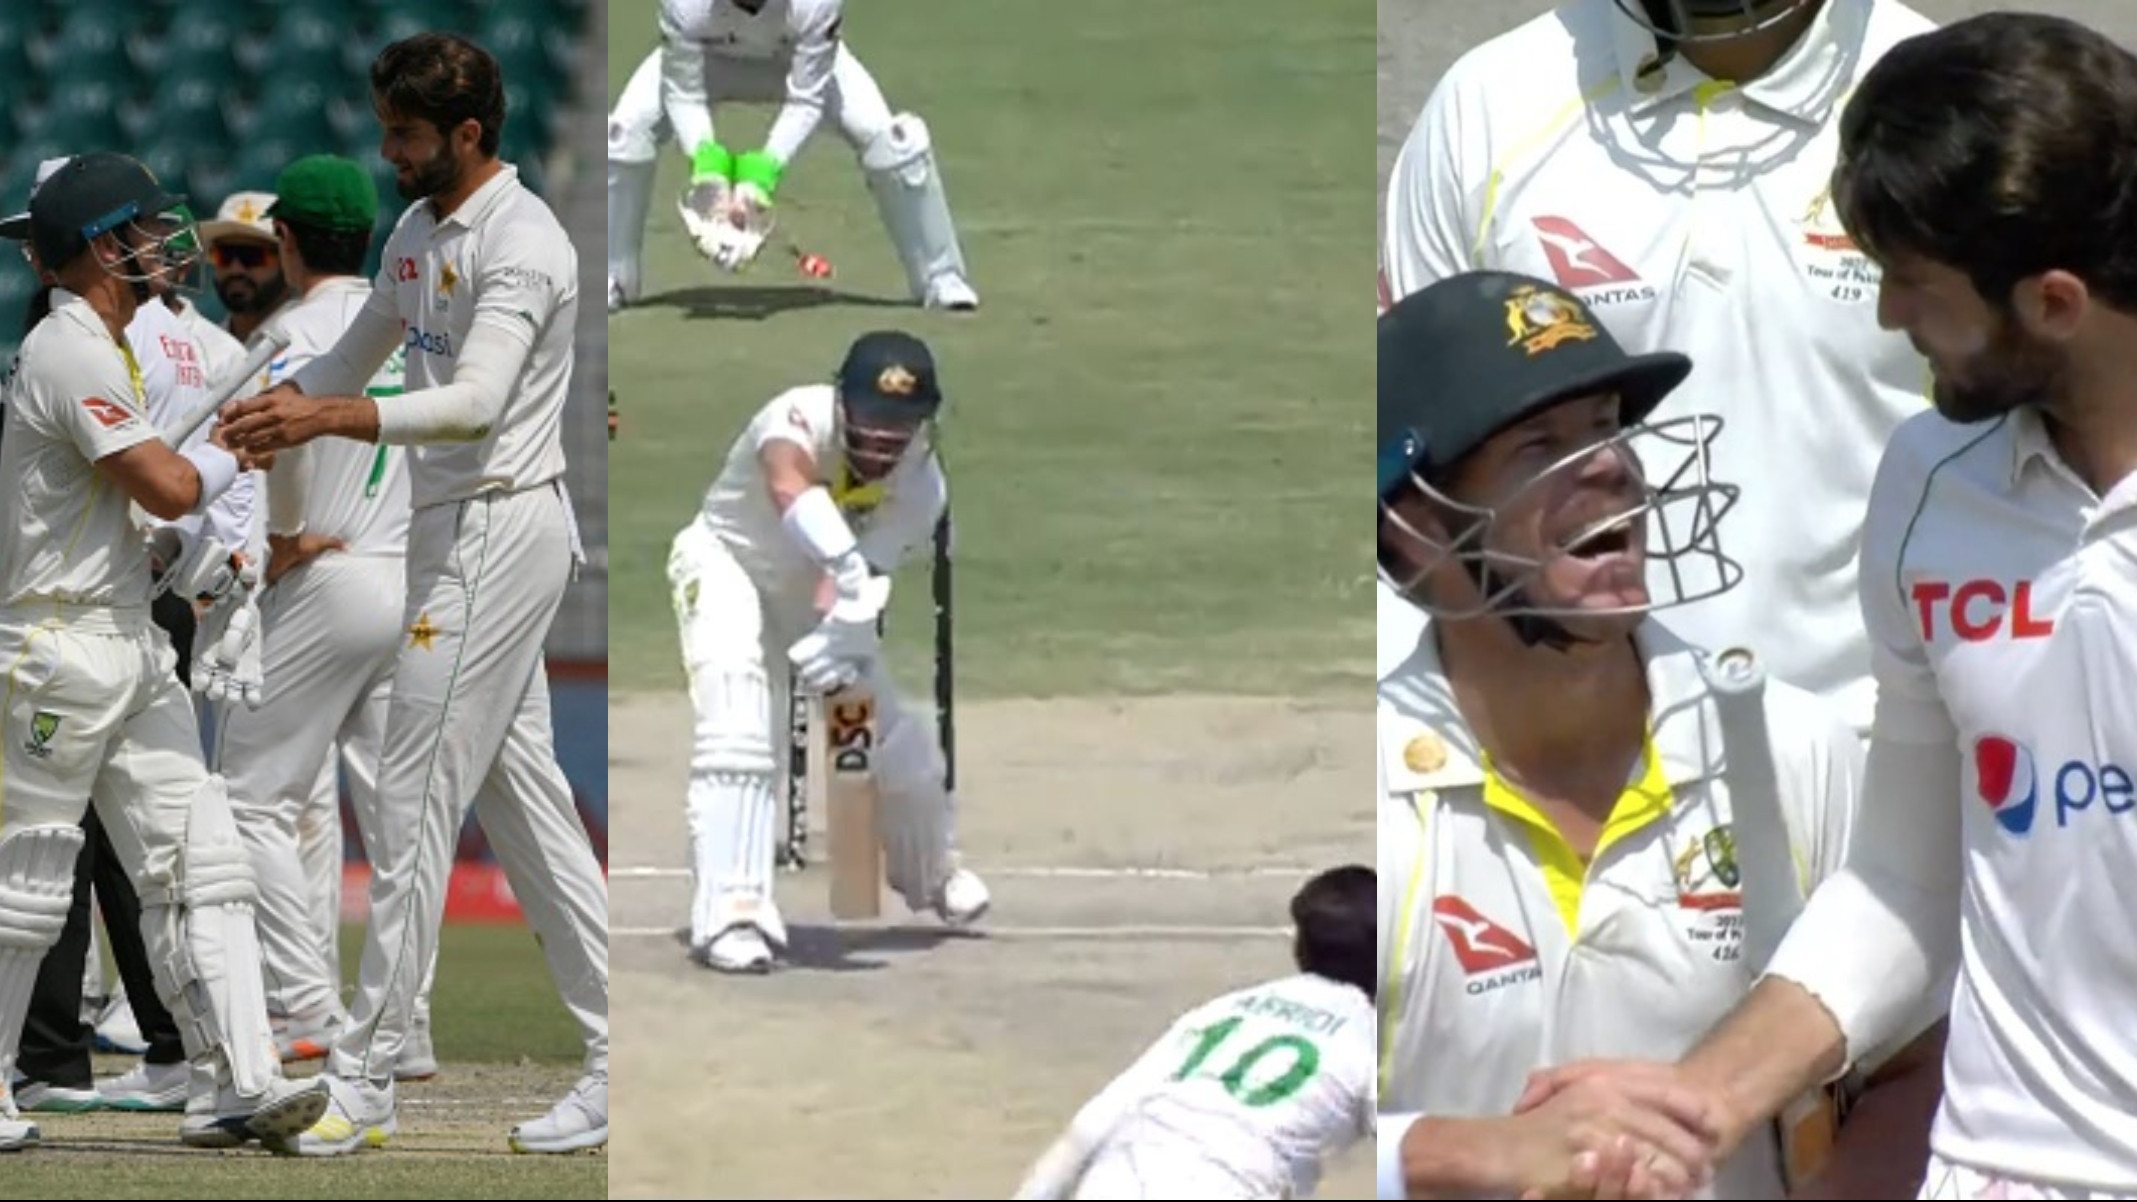 PAK v AUS 2022: WATCH- Shaheen Afridi has last laugh against David Warner after day 3 face-off; shakes hands after dismissal